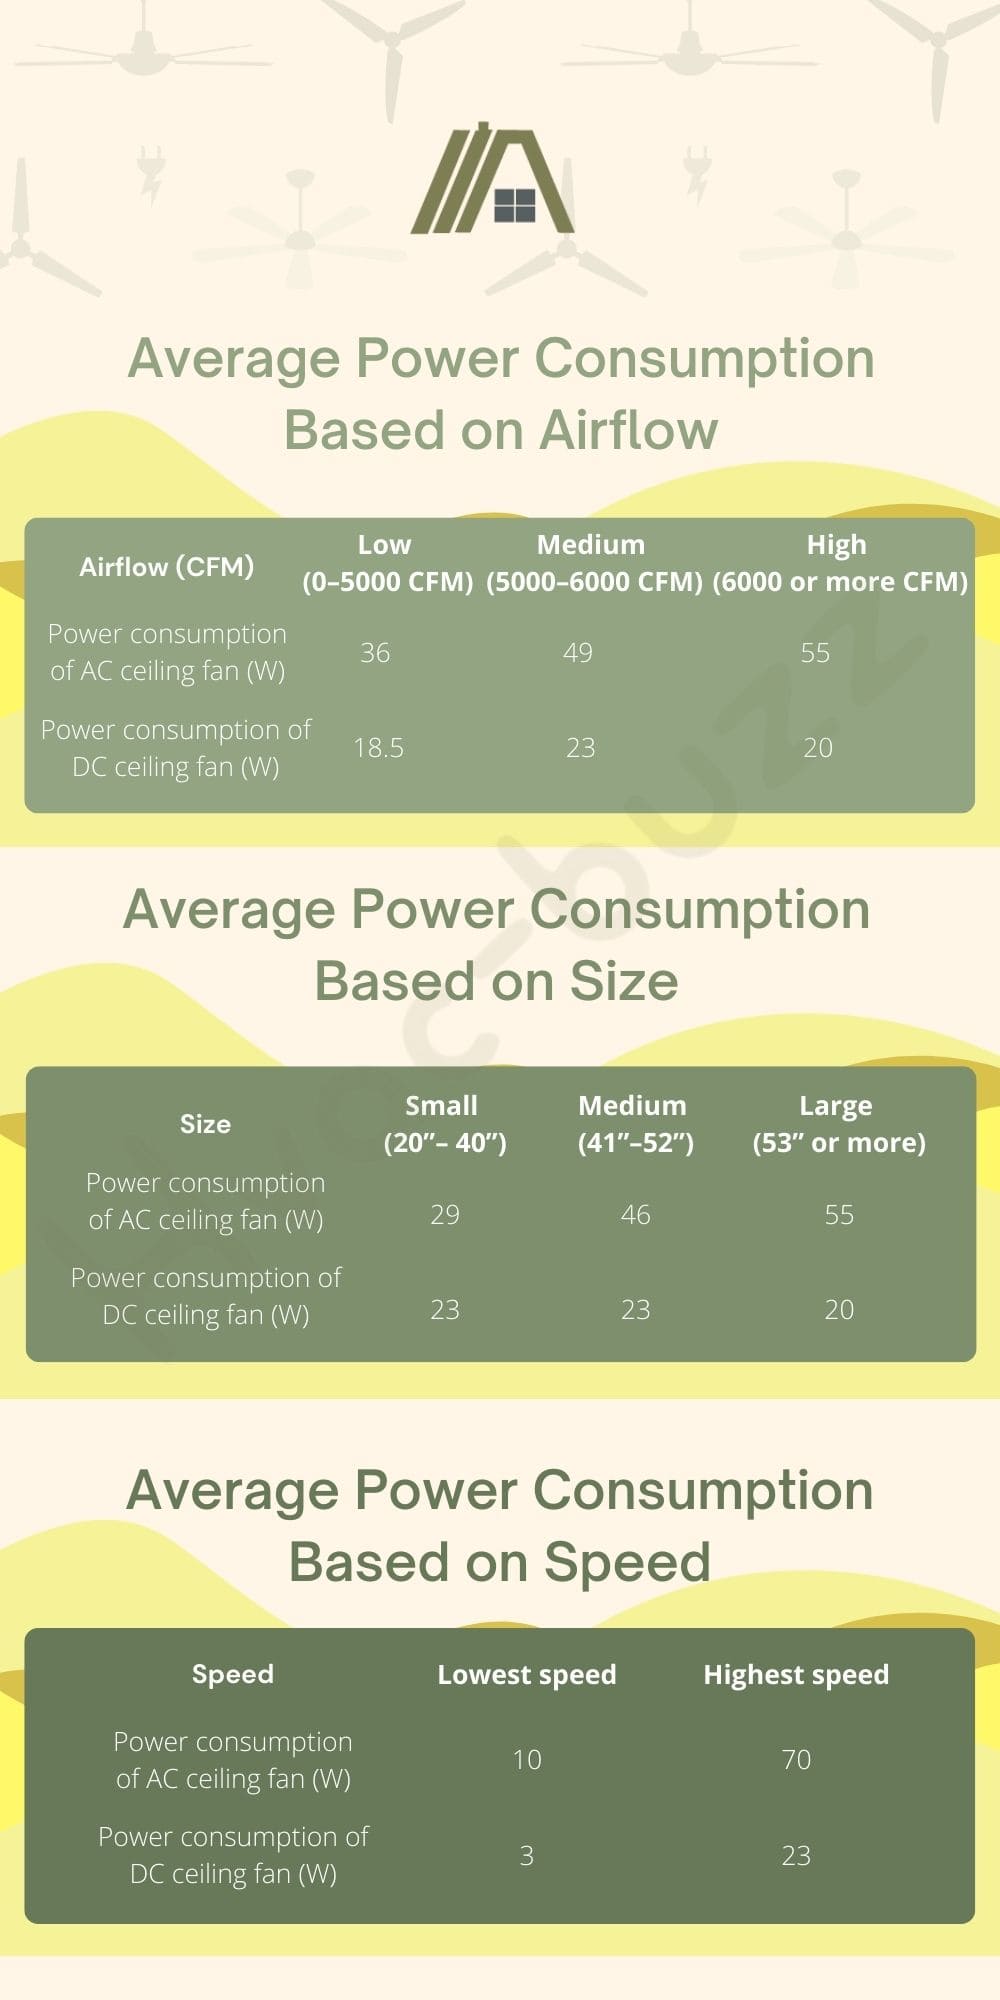 Average Power Consumption of an AC and DC Ceiling Fans based on airflow, size and speed